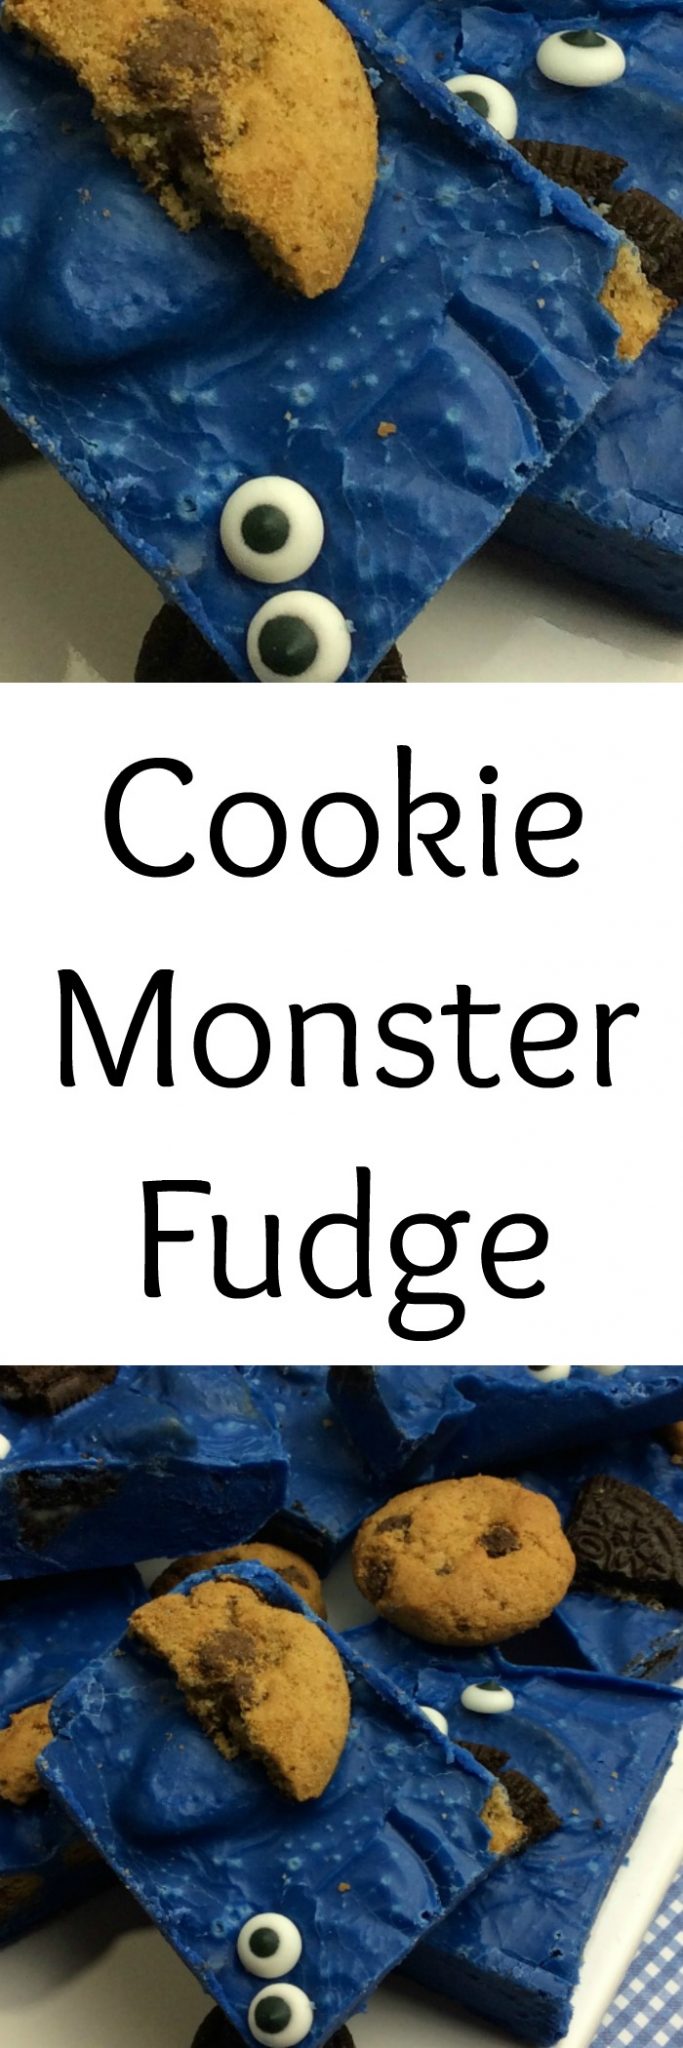 Want a Cookie Monster treat that will anyone over? This Cookie Monster fudge is easy to make, tastes amazing and is the perfect Cookie Monster treat.